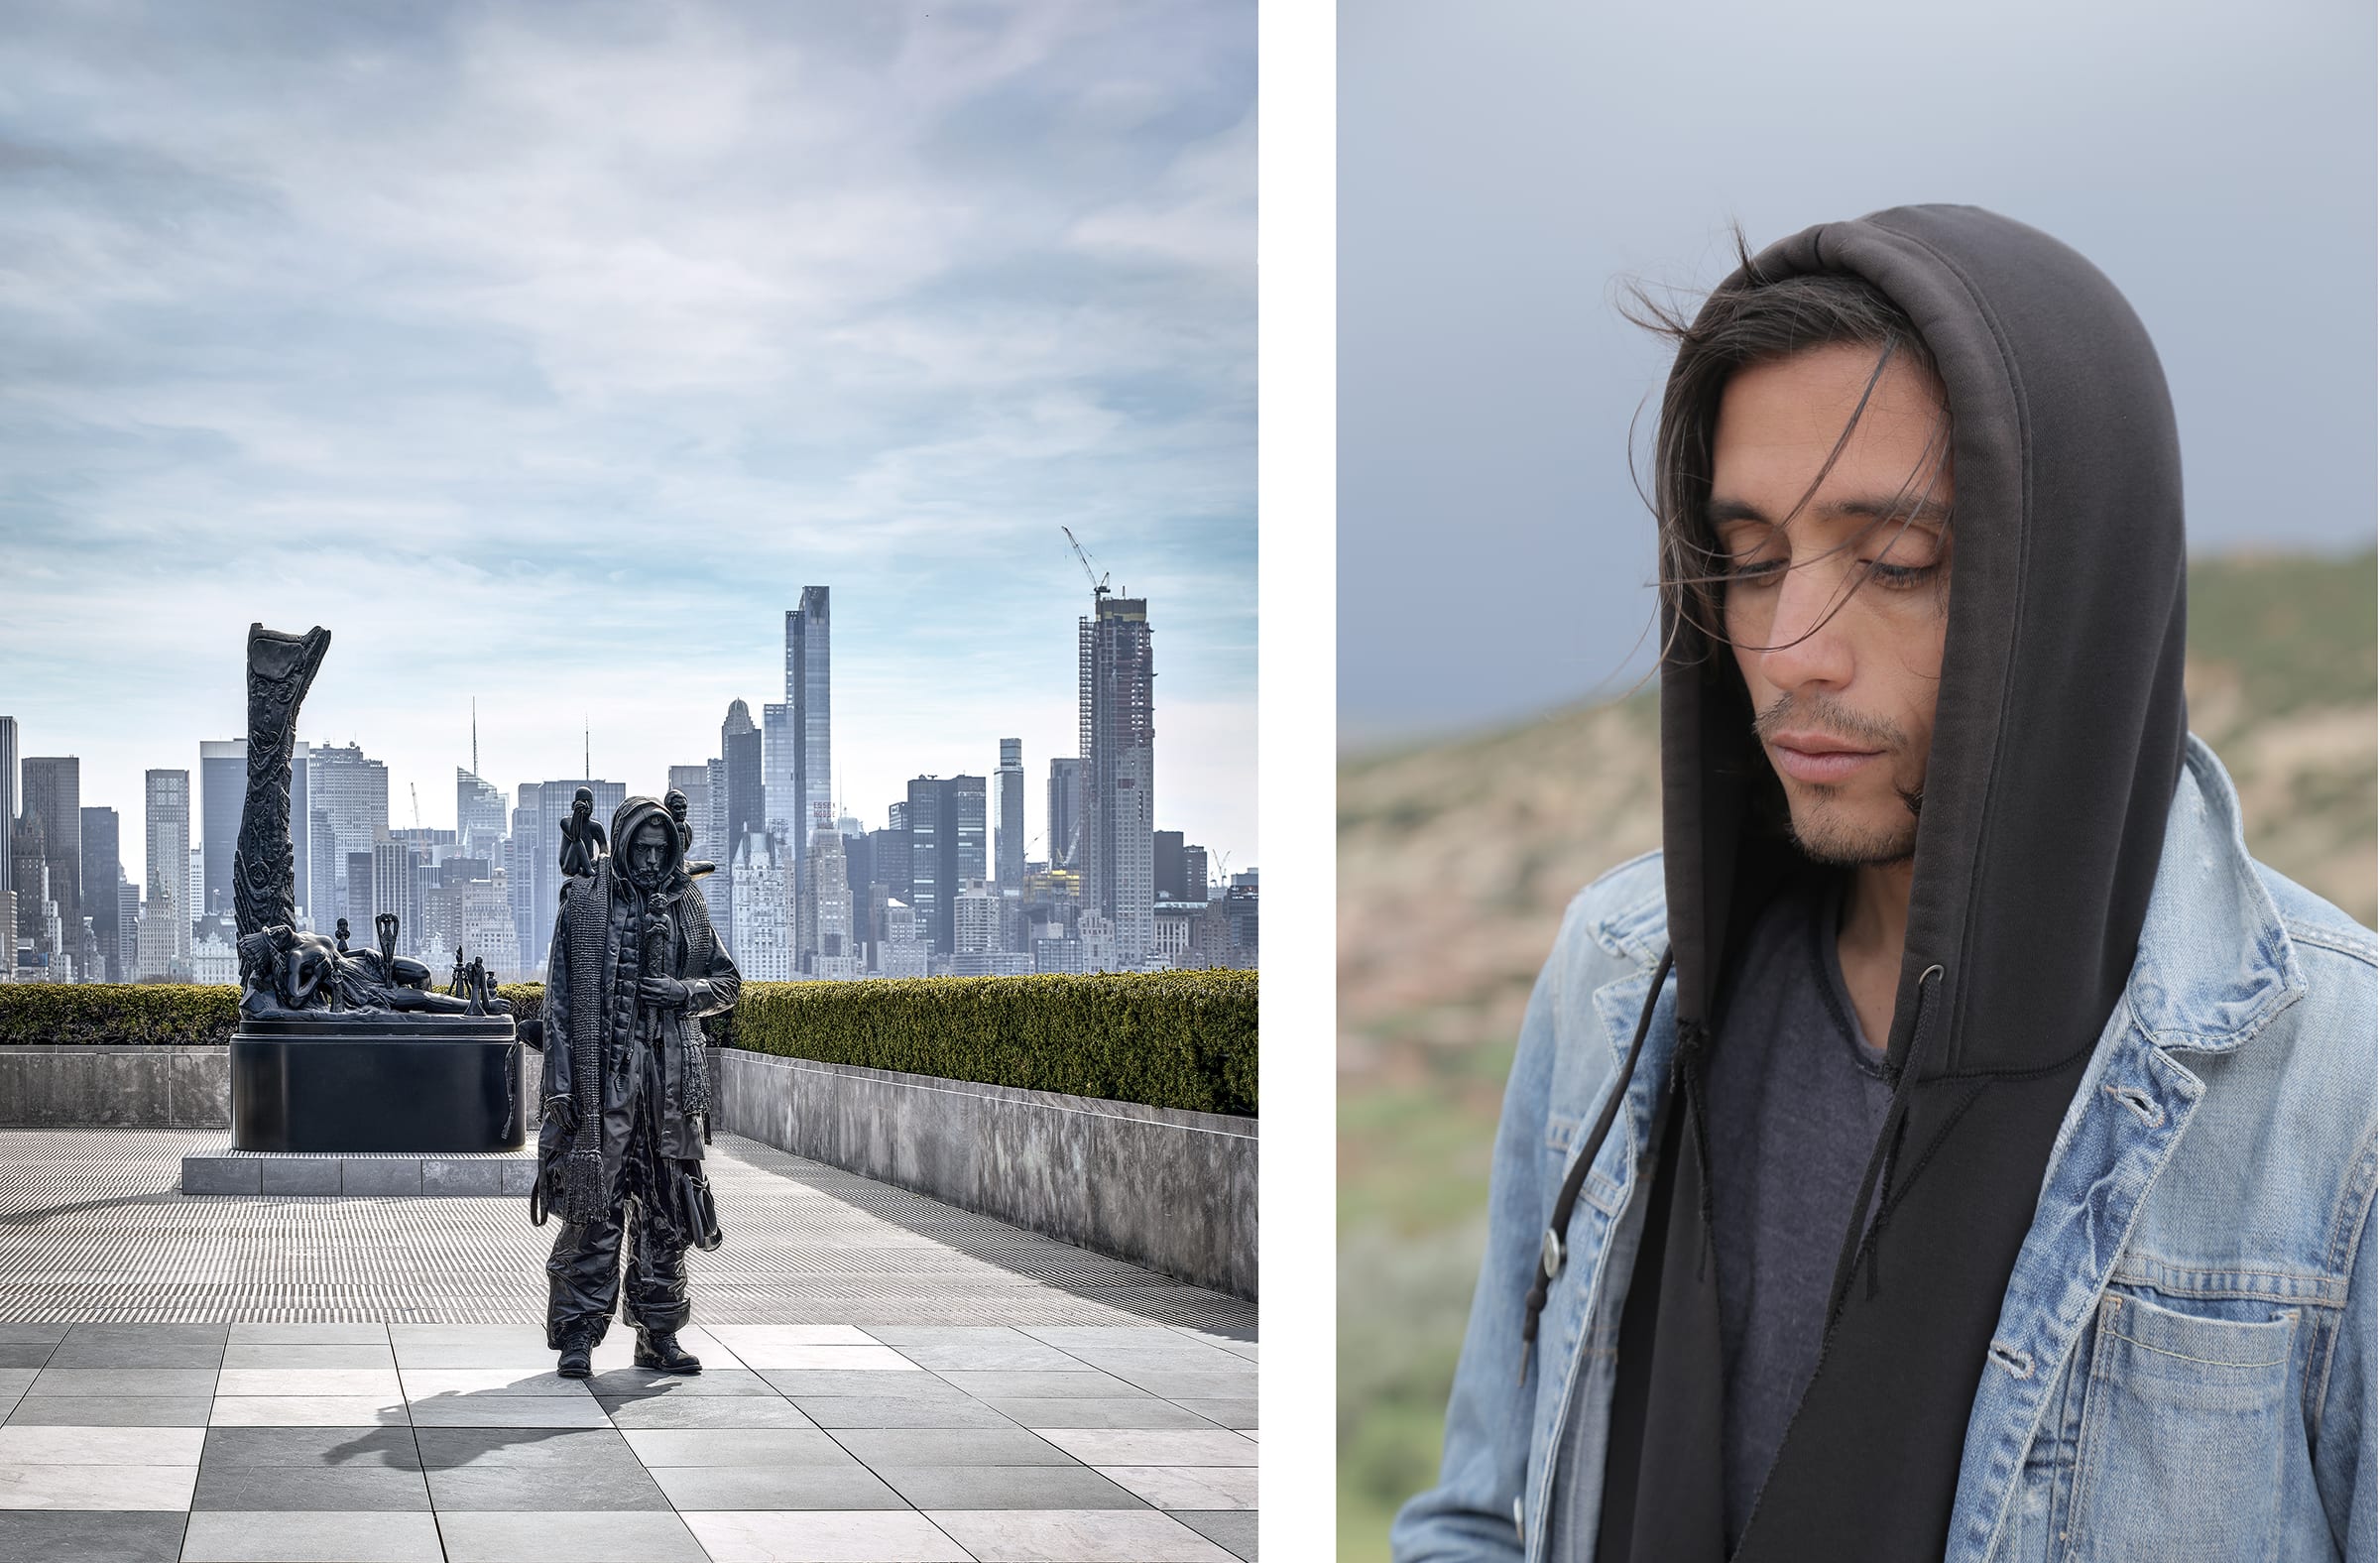 Left: Adrián Villar Rojas, The Theatre of Disappearance, 2017. Installation view, The Roof Garden Commission at The Metropolitan Museum of Art, New York, 2017. Courtesy of the artist, Marian Goodman Gallery, and kurimanzutto. Photo by Michael Kirby Smith. Right: Adrián Villar Rojas. Photo by Mario Caporali, 2016.